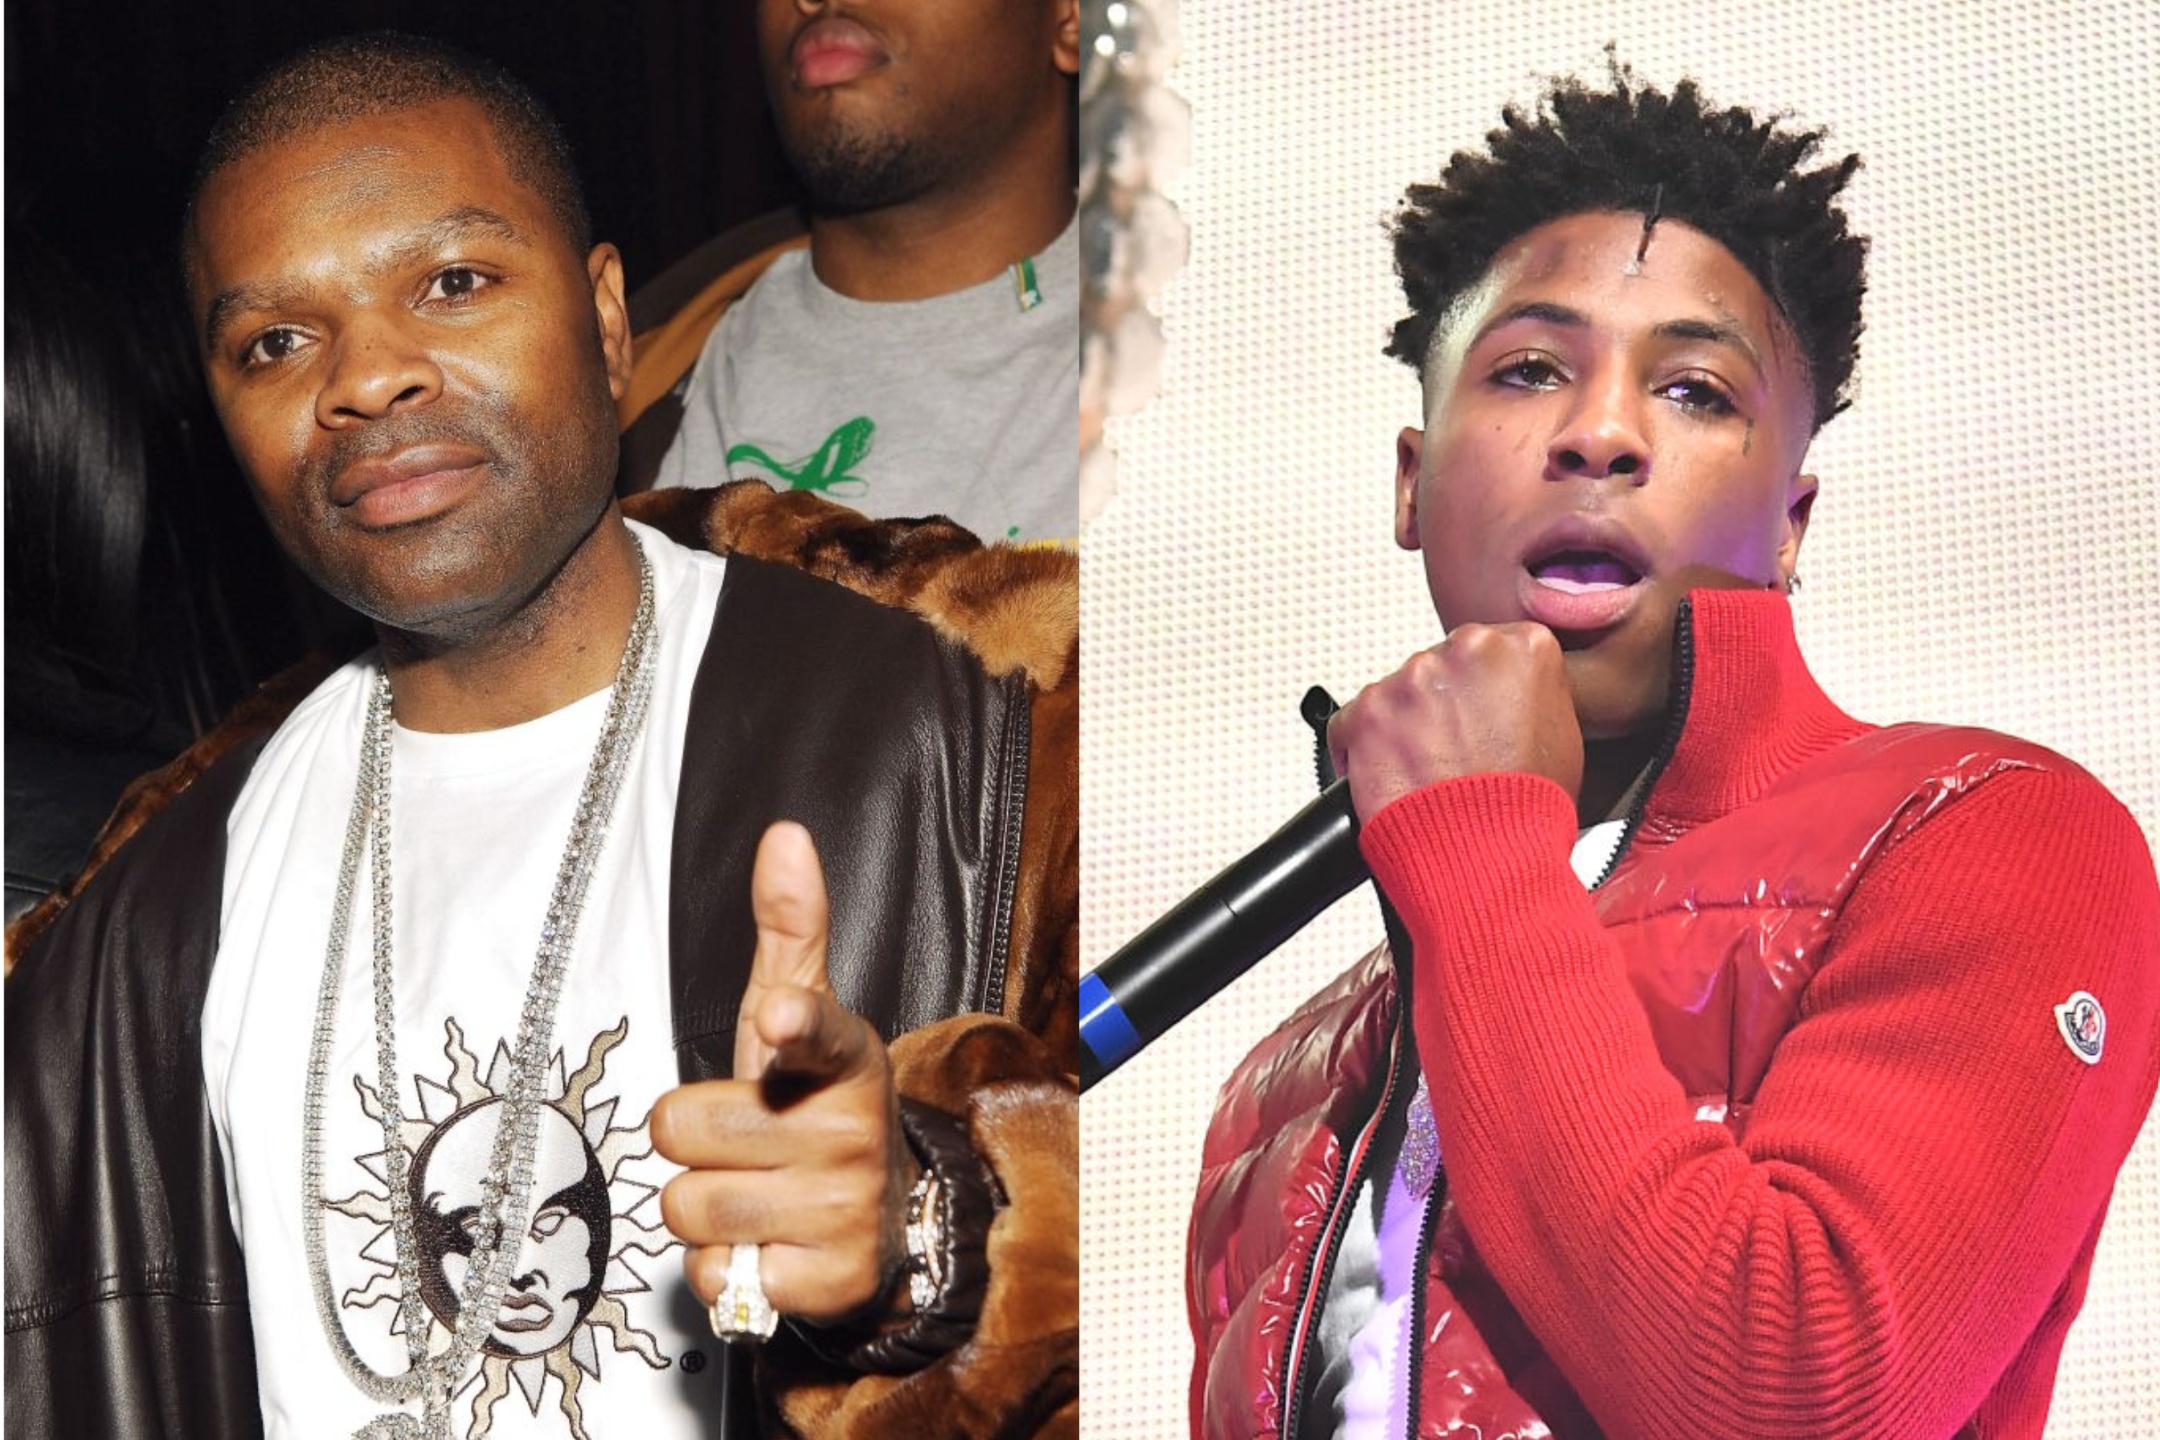 J. Prince Warns NBA Youngboy After Dissing Drake: “He Rolls With Me”